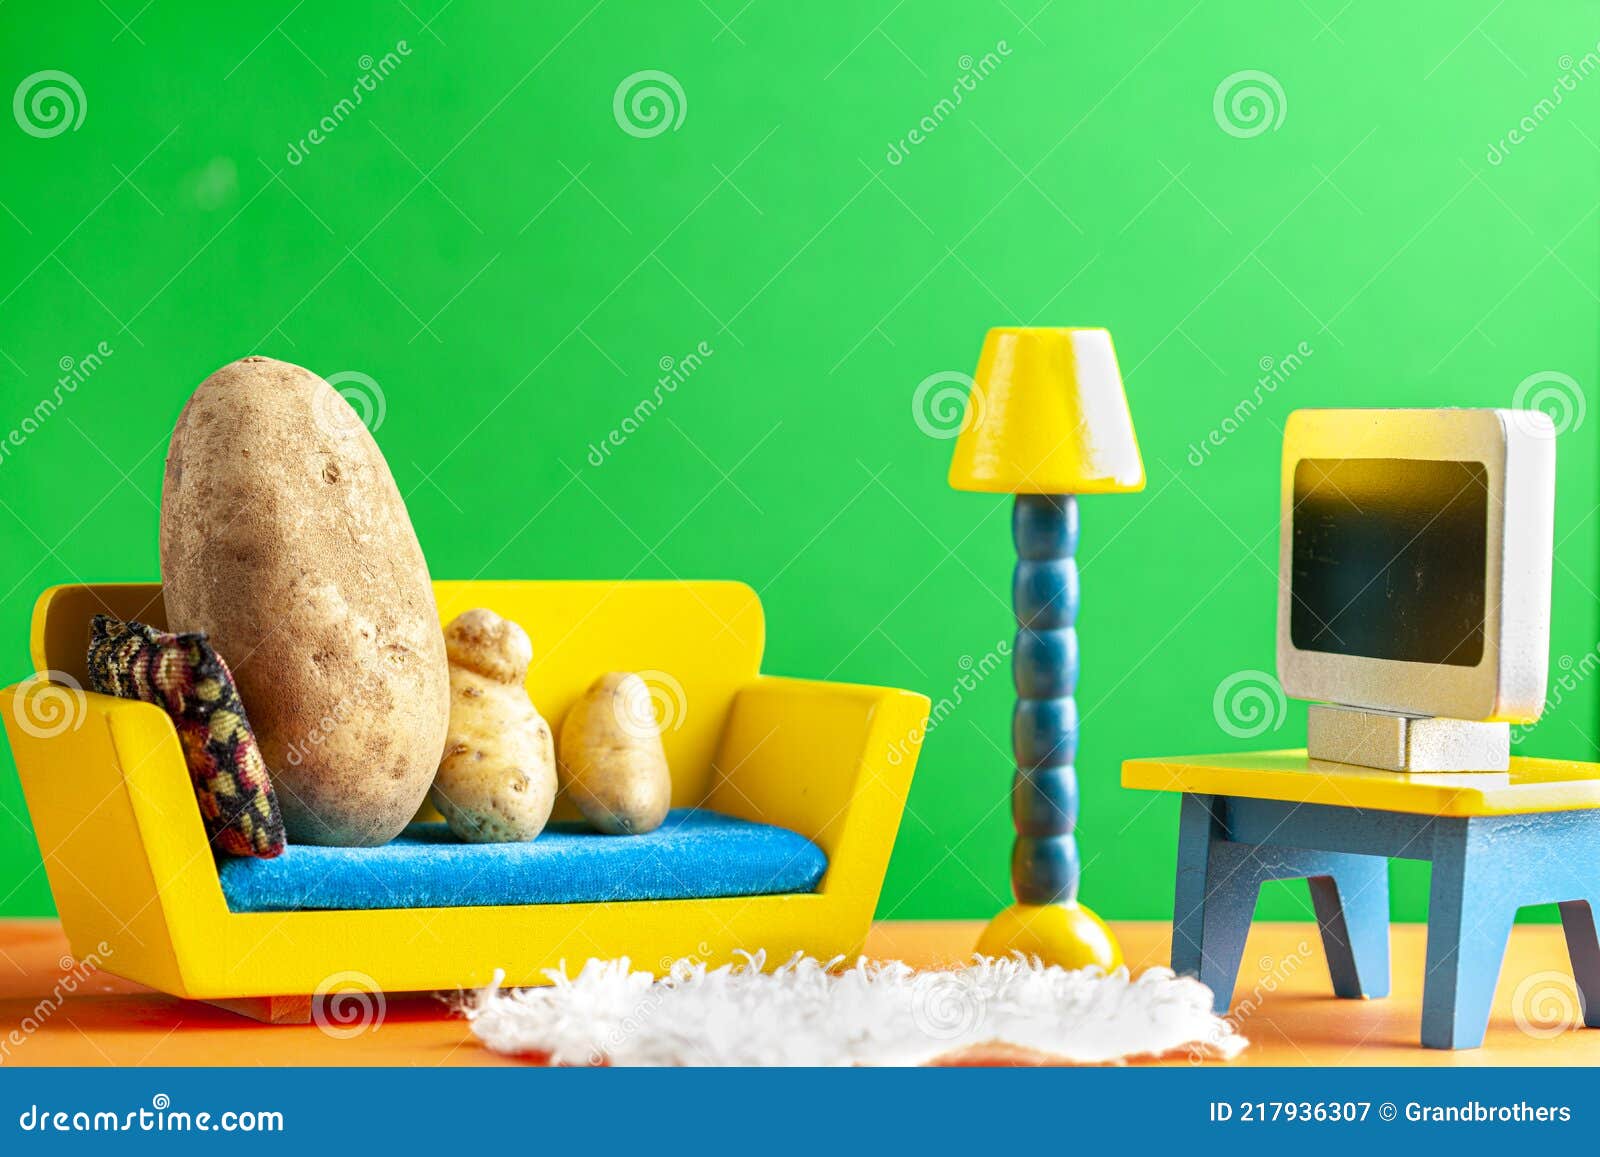 a quirky metaphorical concept image showing a potato family lying on a couch watching tv